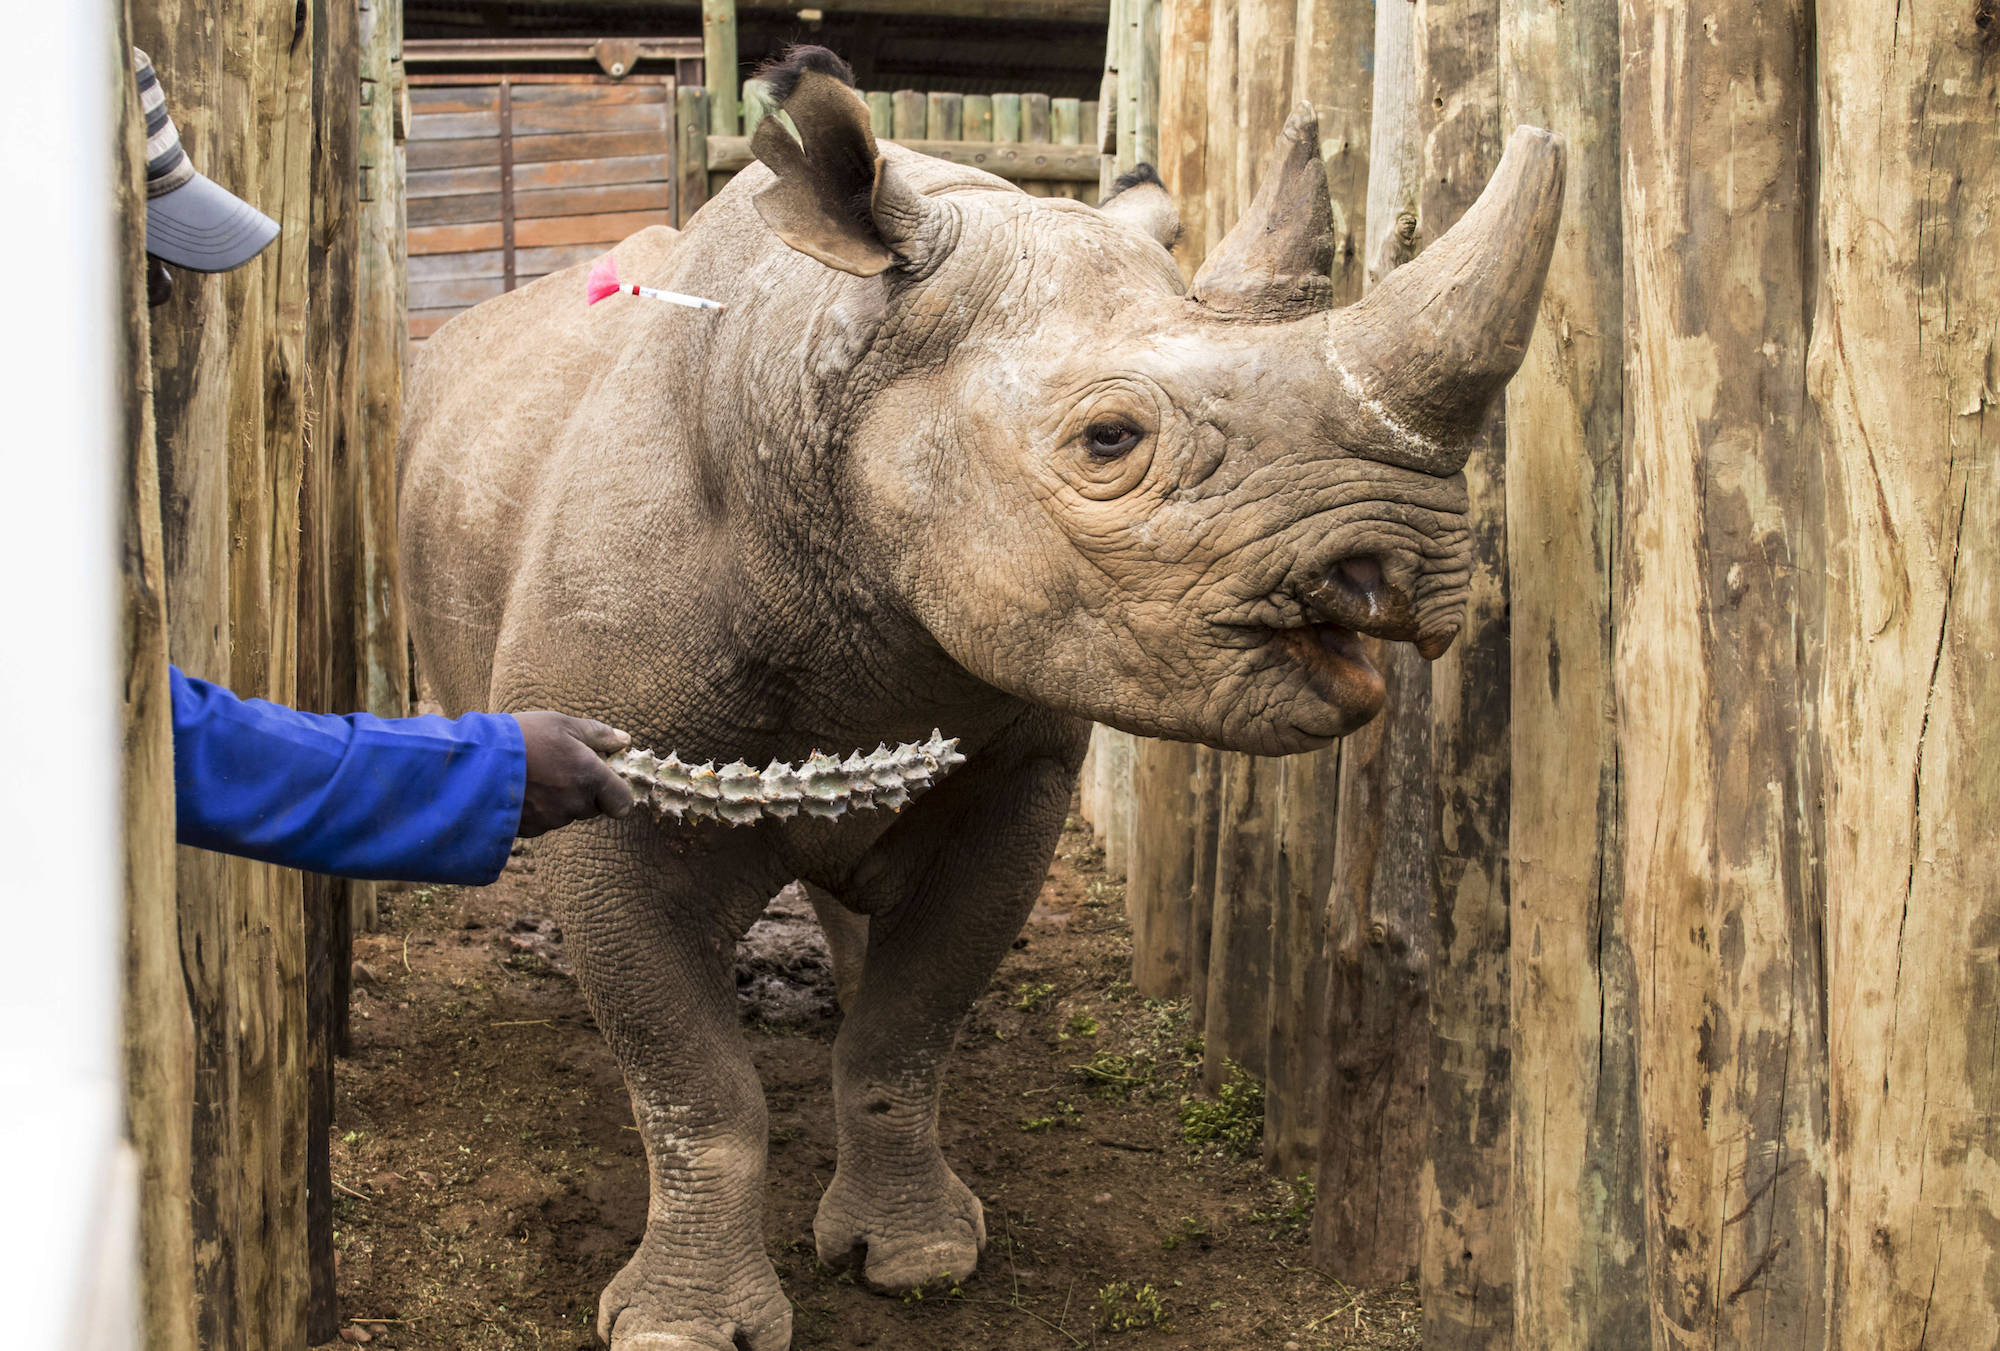 A rhino is coaxed into a cage in the Addo Elephant Park, near Port Elizabeth, South Africa, Thursday May 3, 2018, to be transported to Zakouma National Park in Chad. File photo. (AP Photo/Michael Sheehan)